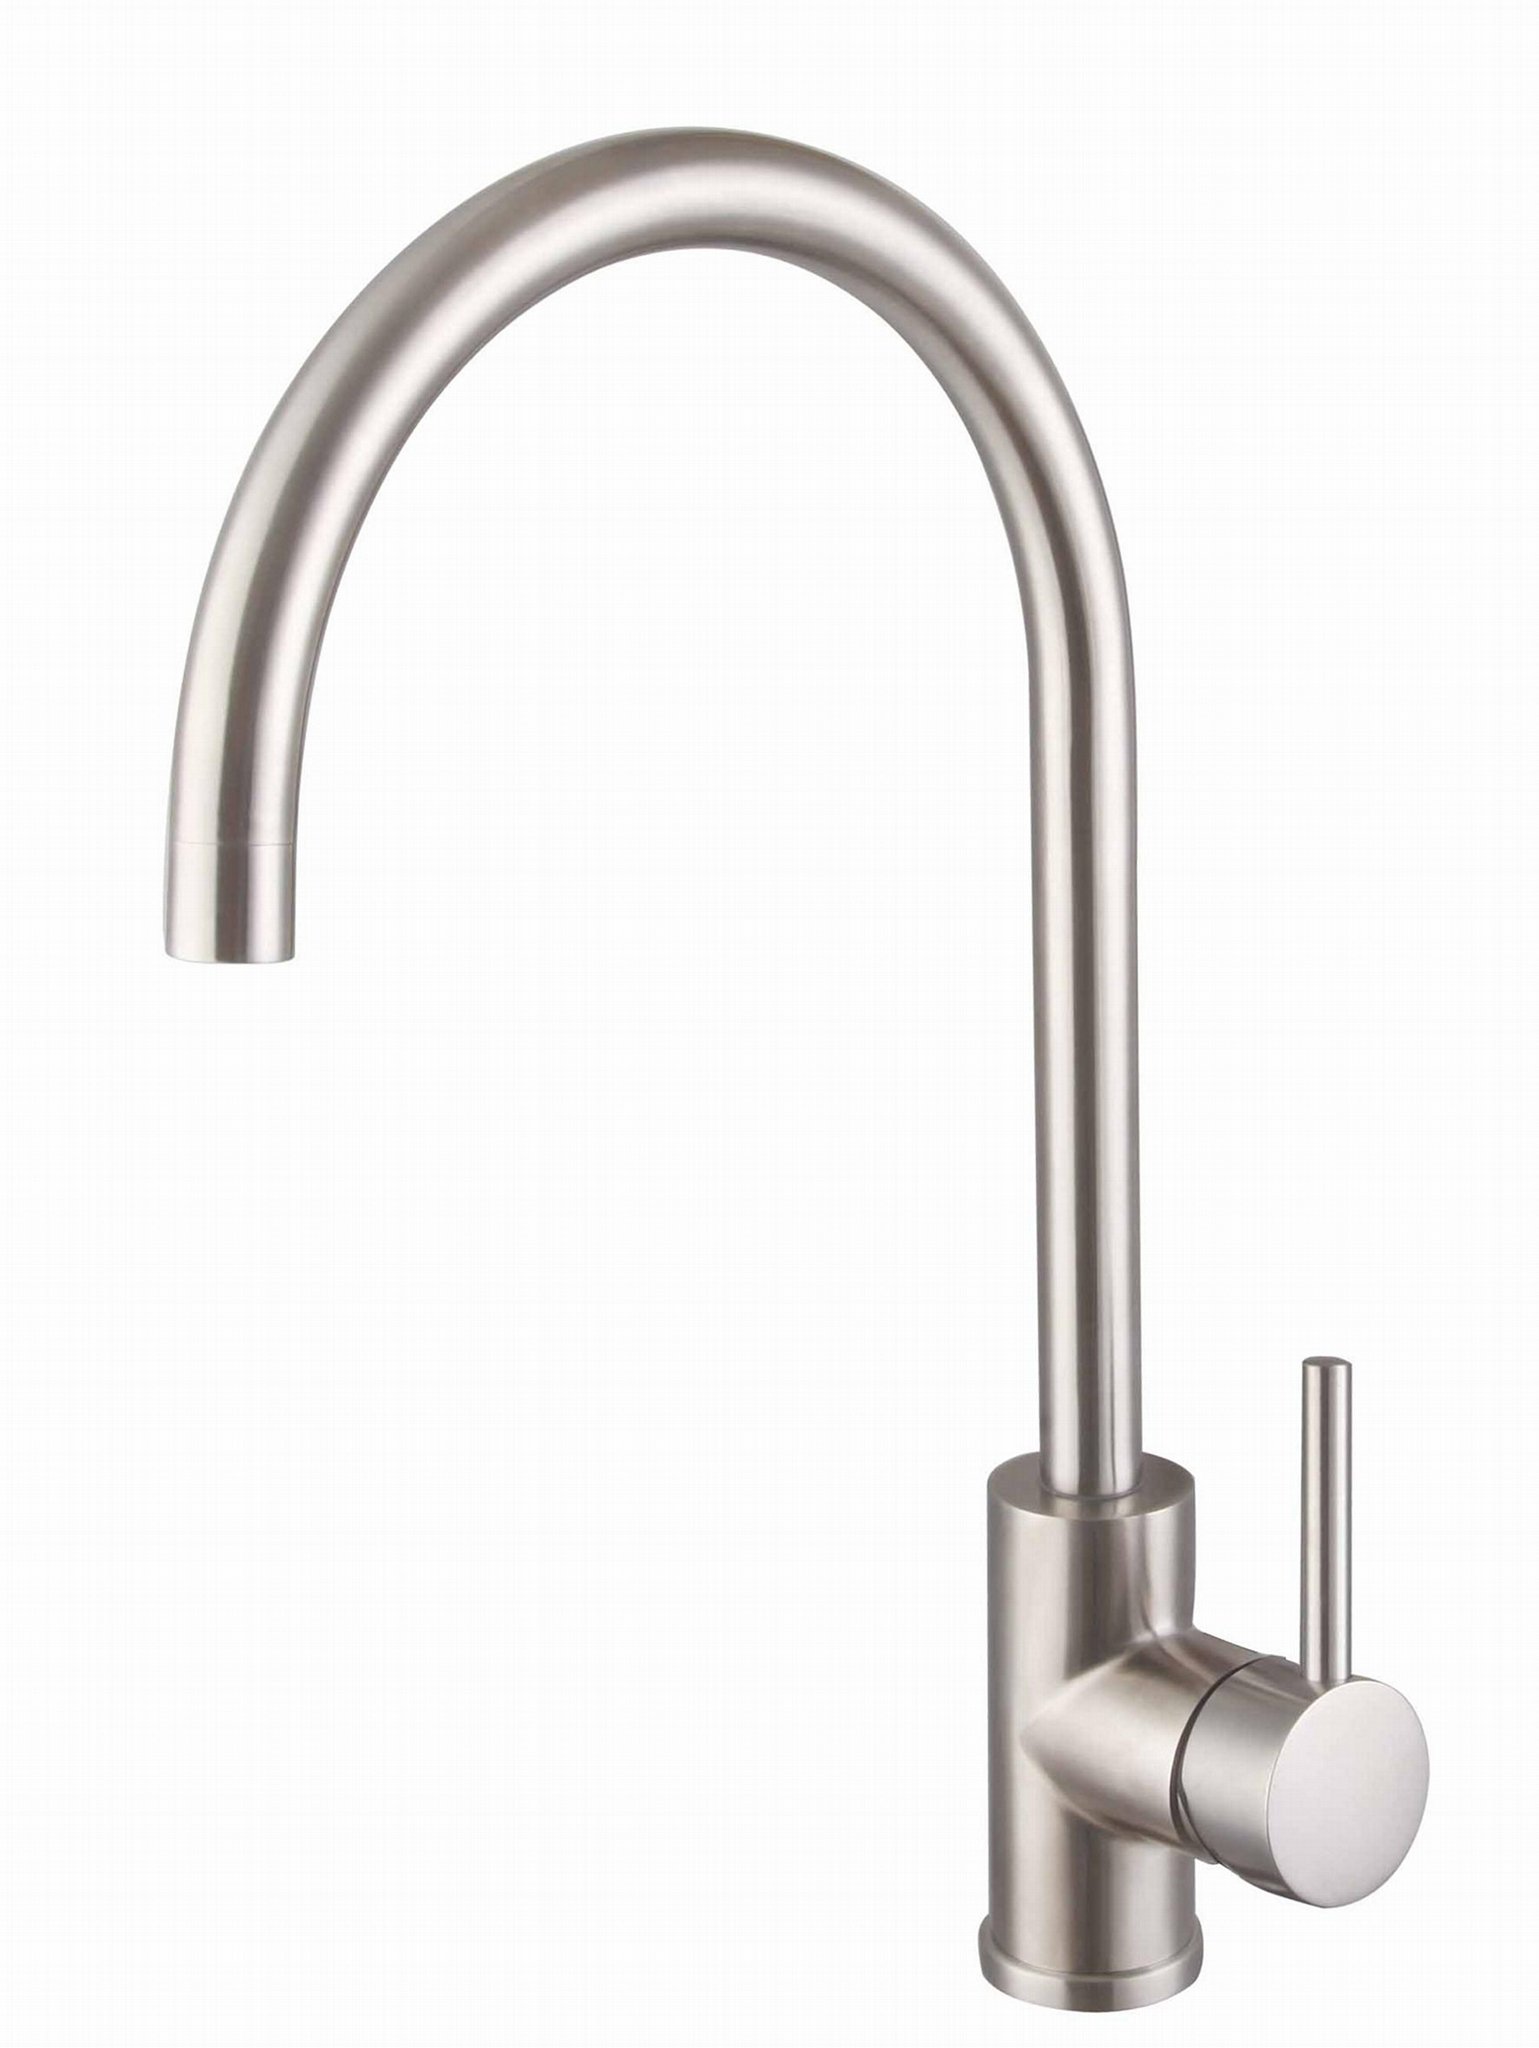 LED kitchen faucet SUS304 tap accessories fitting